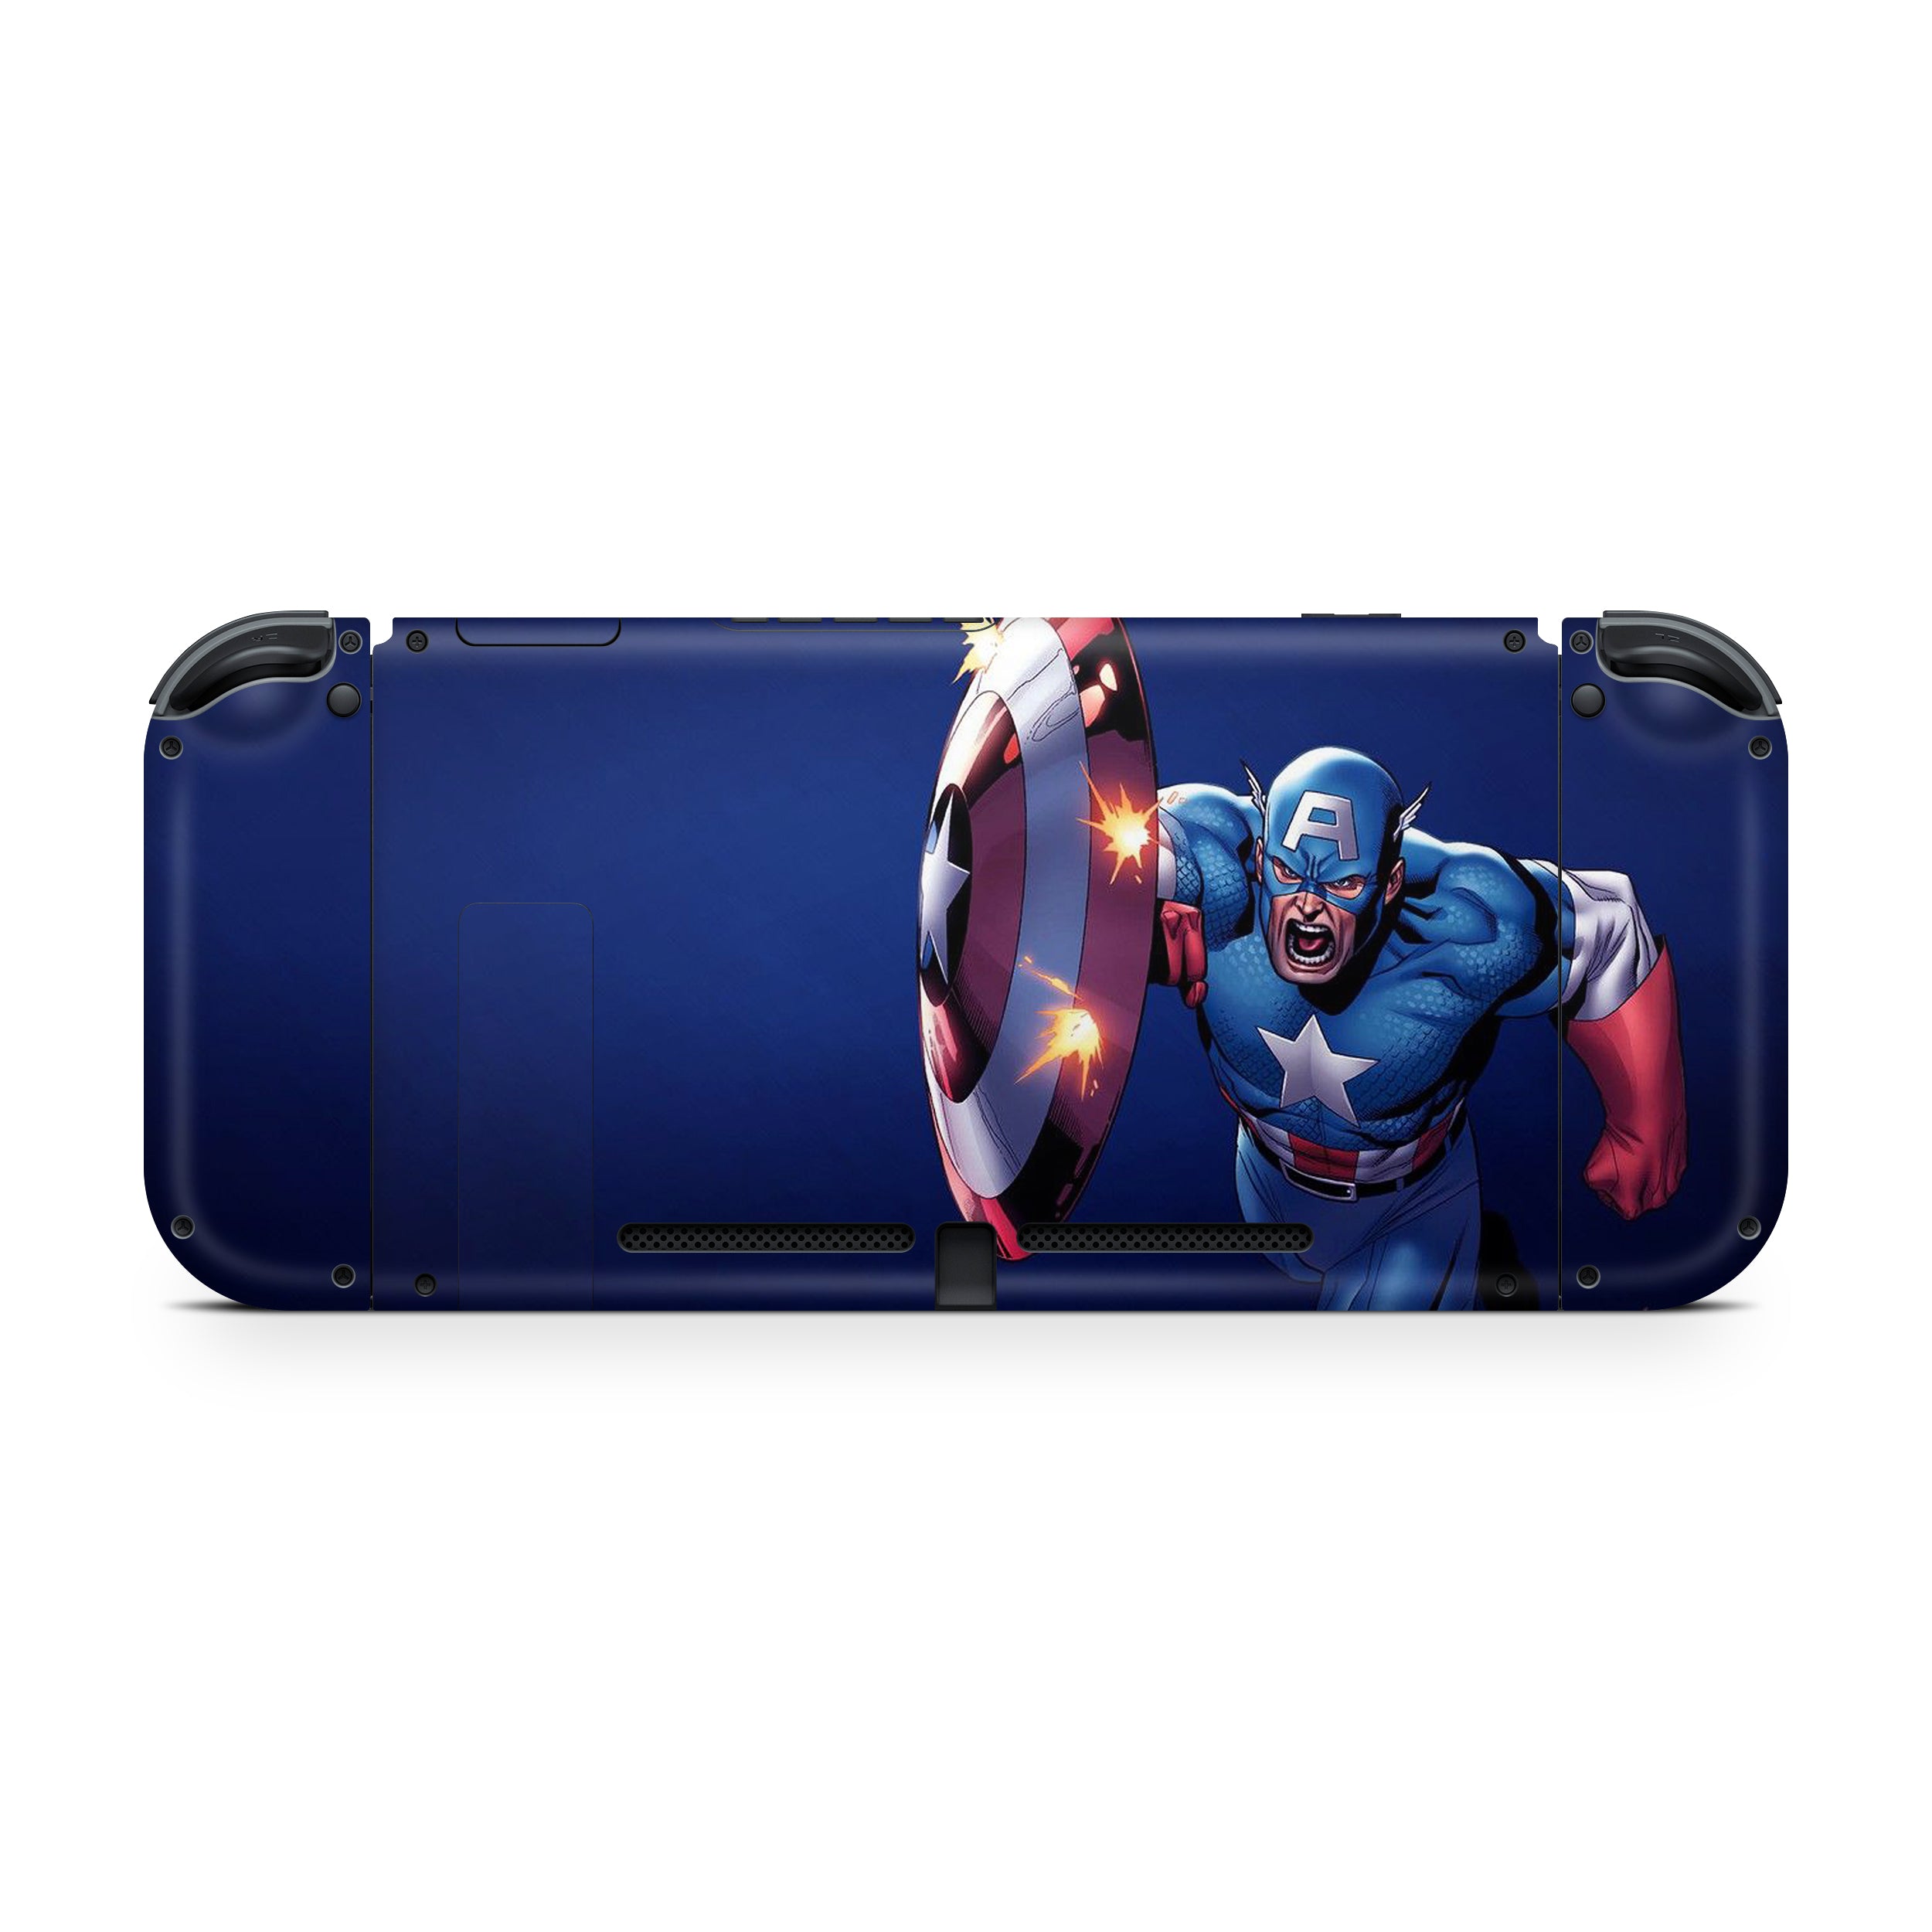 A video game skin featuring a Marvel Comics Captain America design for the Nintendo Switch.